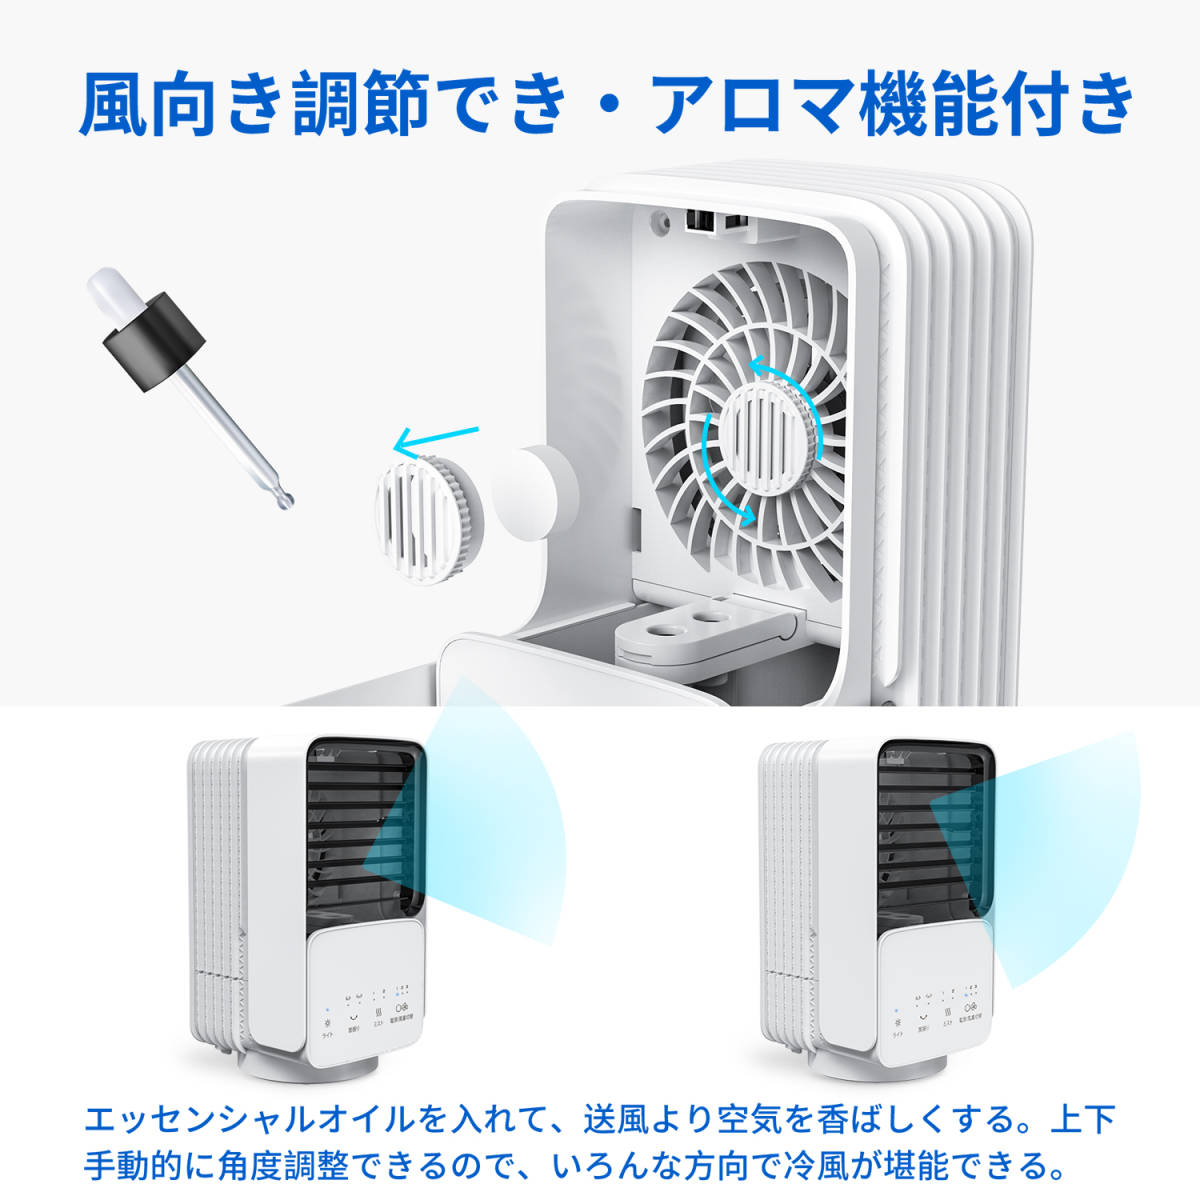 [ new goods * unused ] summer is cold manner machine, winter is humidifier * desk tower fan 